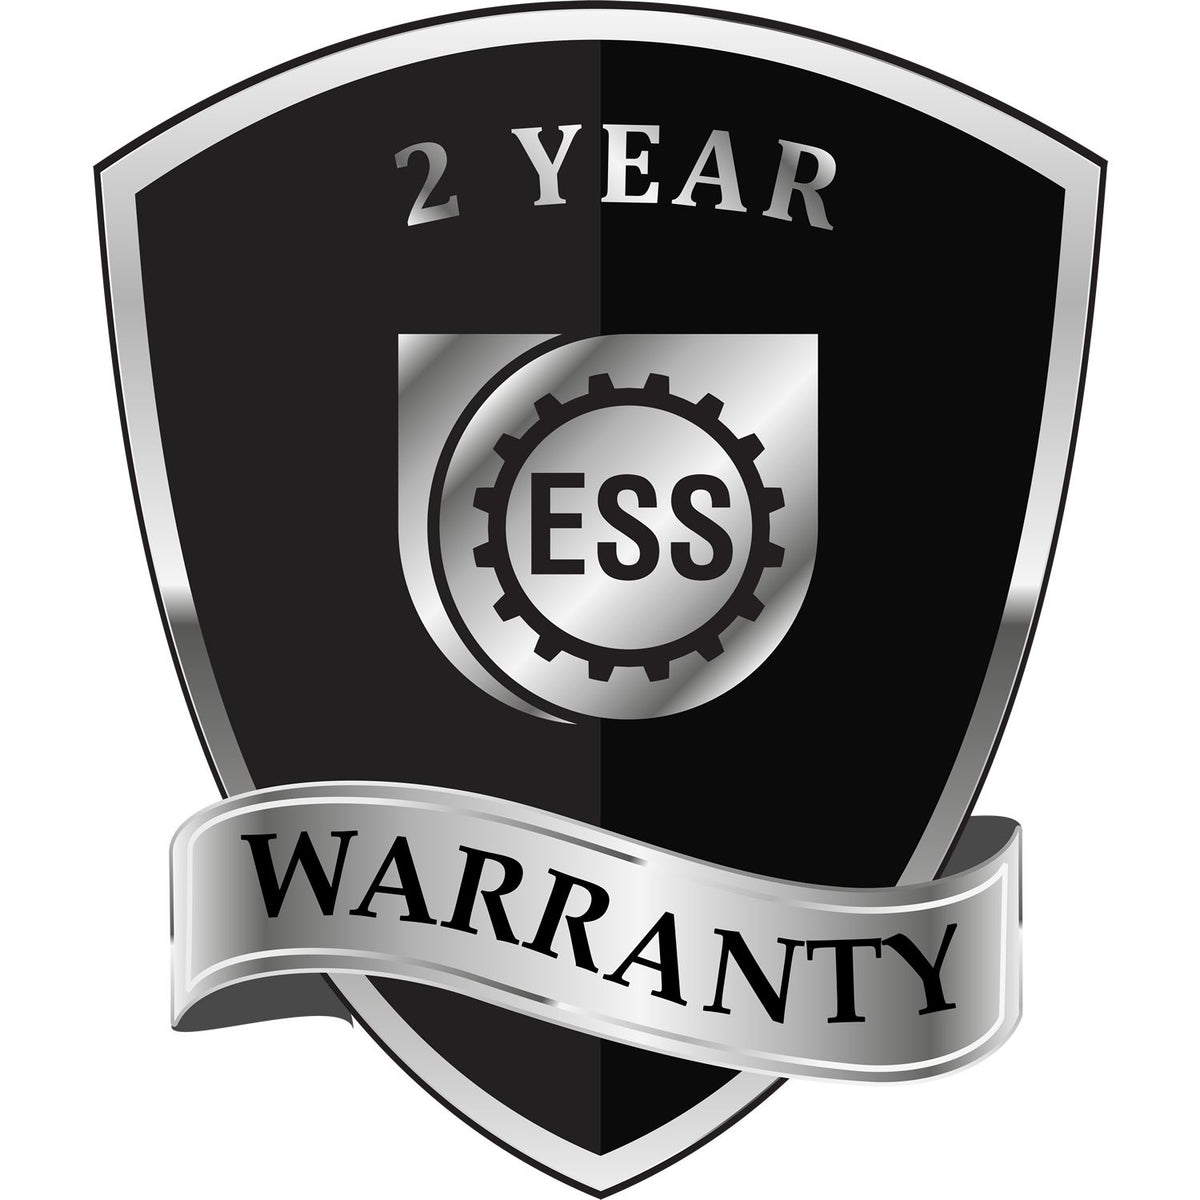 A black and silver badge or emblem showing warranty information for the Gift Nevada Geologist Seal